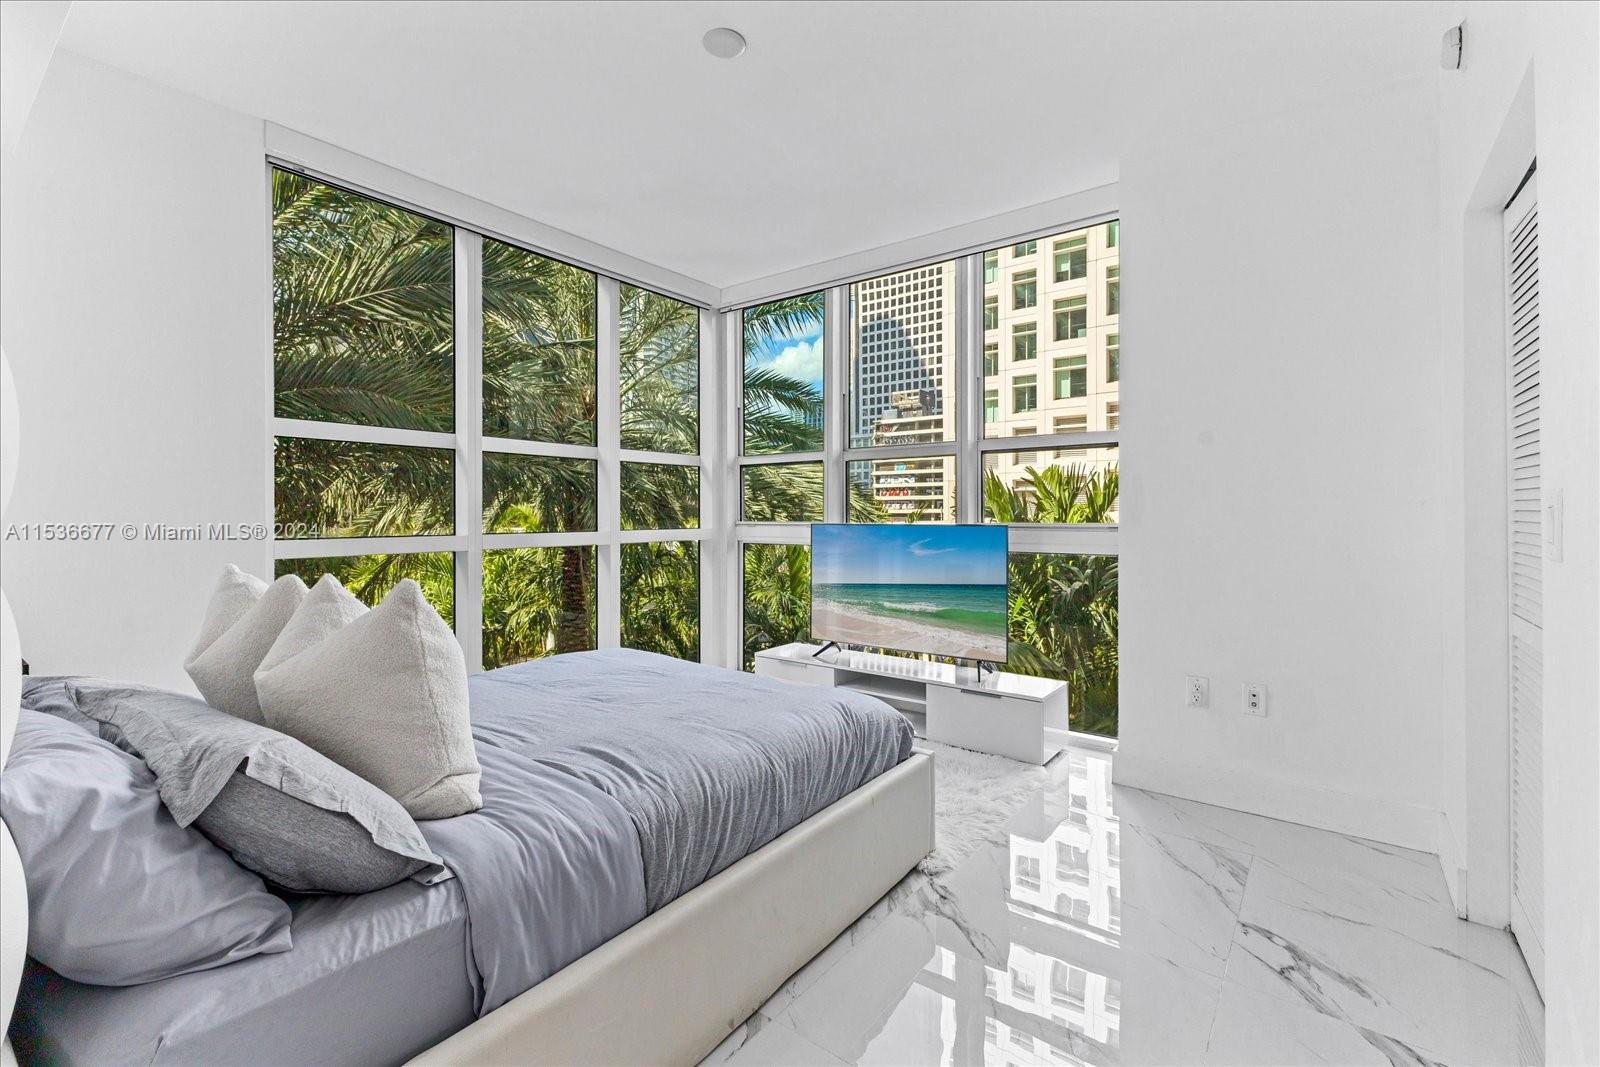 Beautiful corner unit completely renovated and designed in the heart of Brickell! Brand new kitchen & bathroom, porcelain tile flooring throughout entire unit, stainless steel appliances, washer/dyer, black out curtains and spacious corner balcony over looking lush palm trees. Building also offers state of the art amenities such as two amazing pools with cabanas, exercise room, steam room and business center. Conveniently located within walking distance of banks, shops at Brickell City Center, parks, restaurants, downtown and much more.